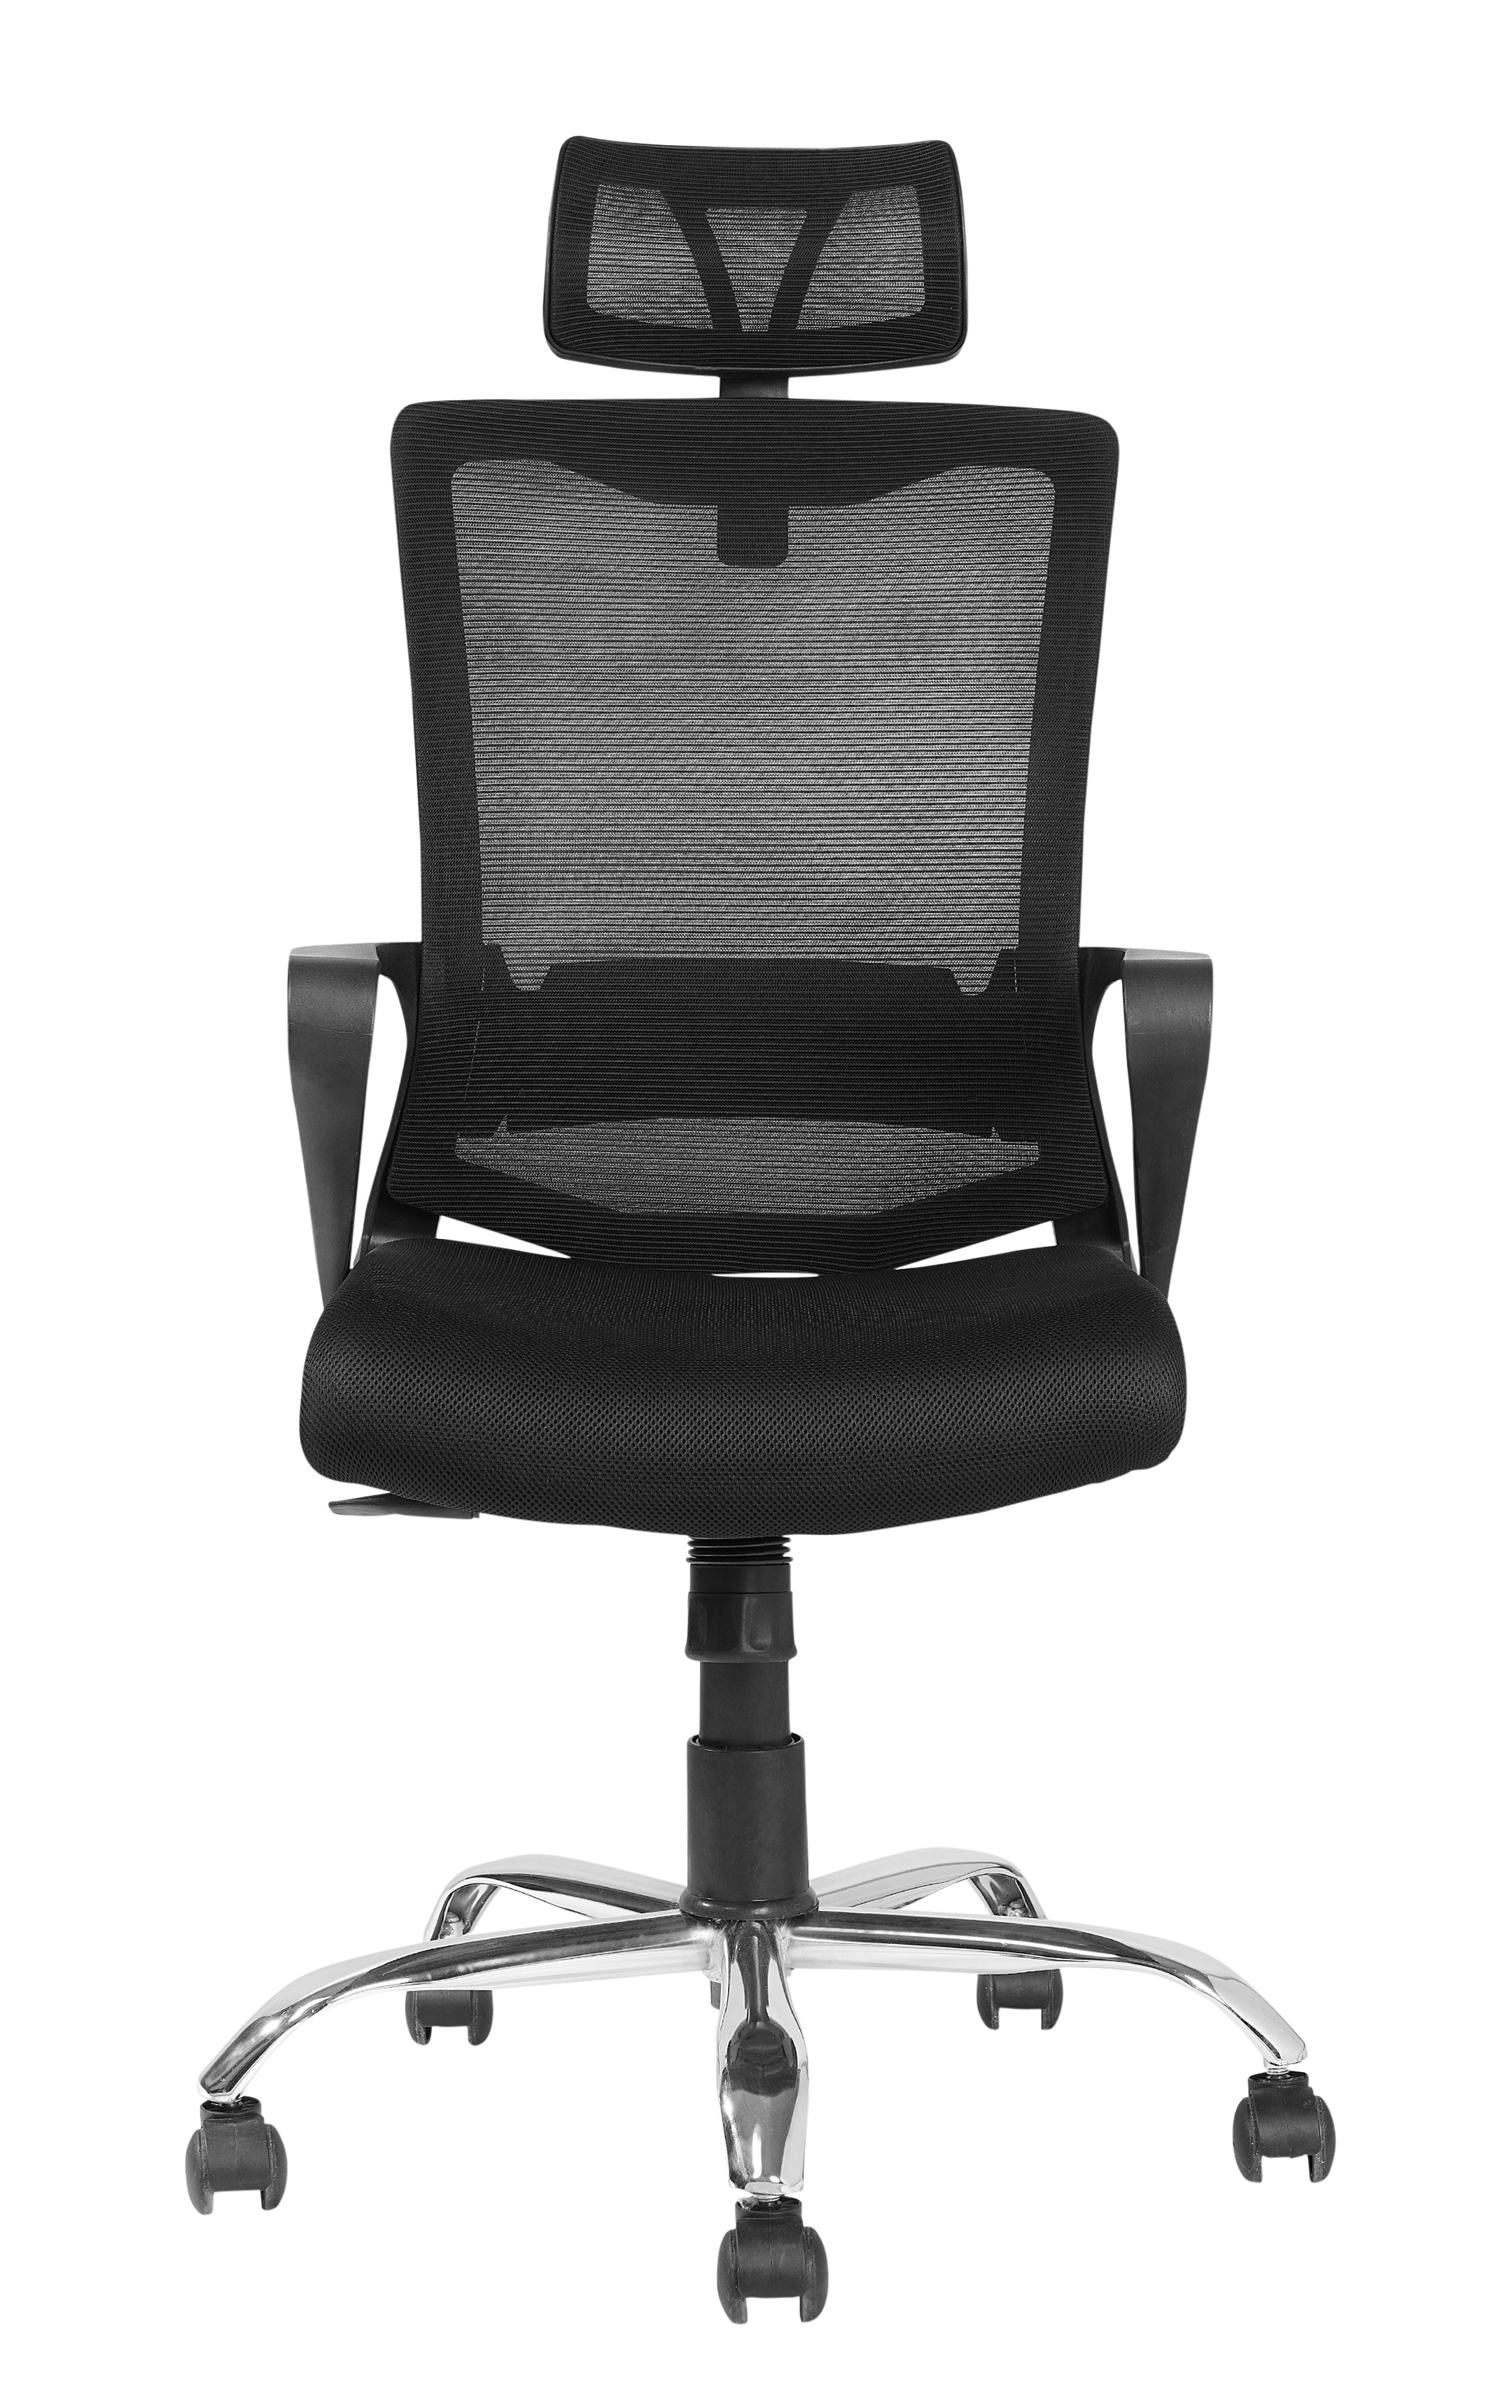 Rico High Back Ergonomic Office Chair With Cushion Seat And Chrome Base - Black